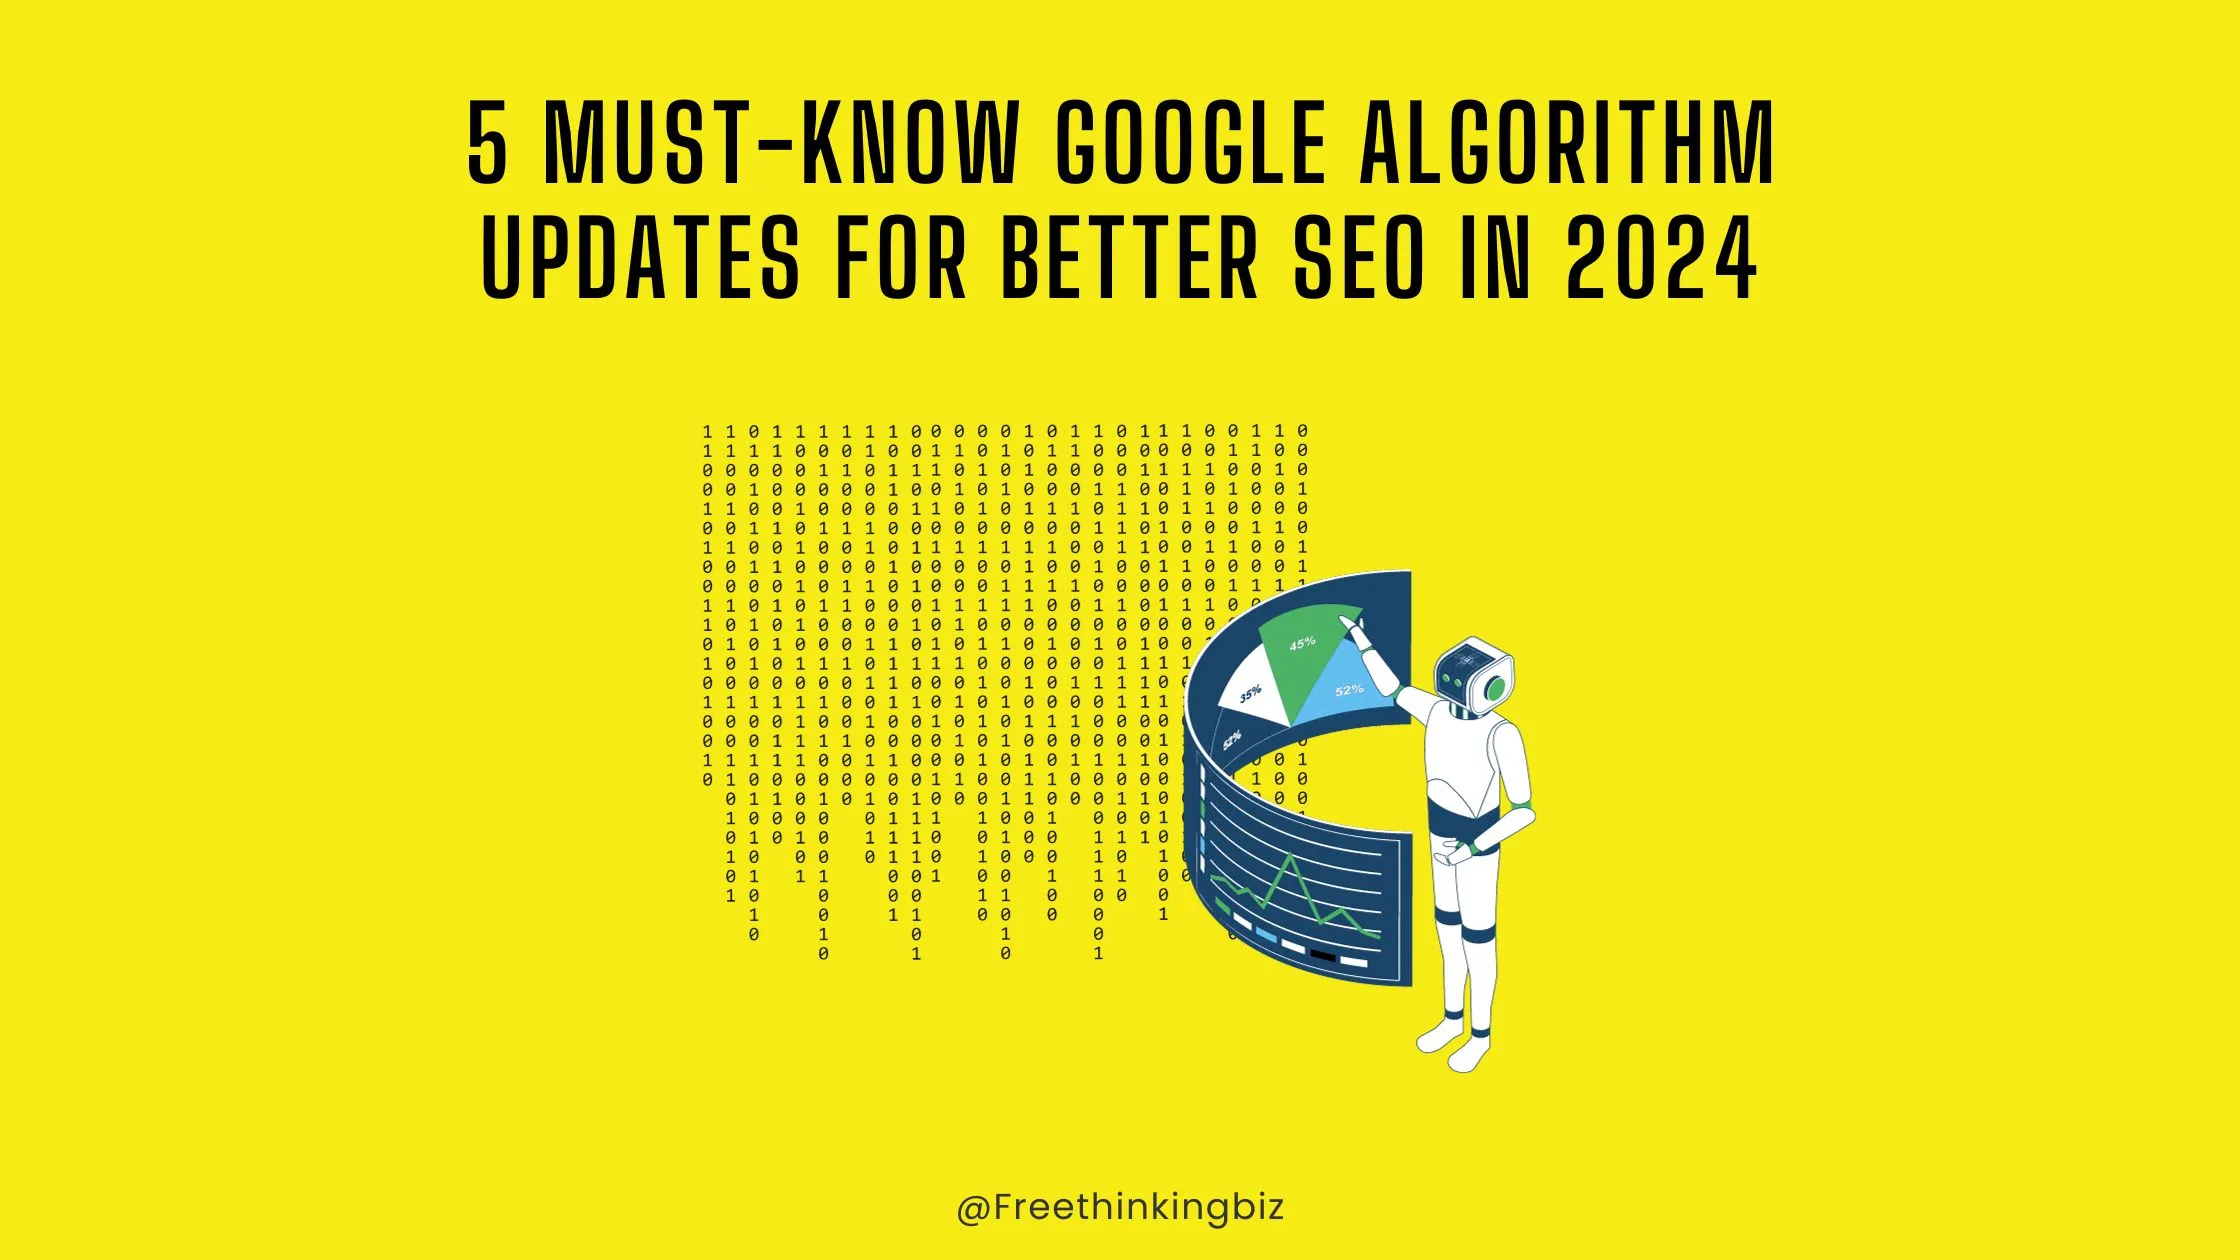 5 Must-Know Google Algorithm Updates for Better SEO in 2024